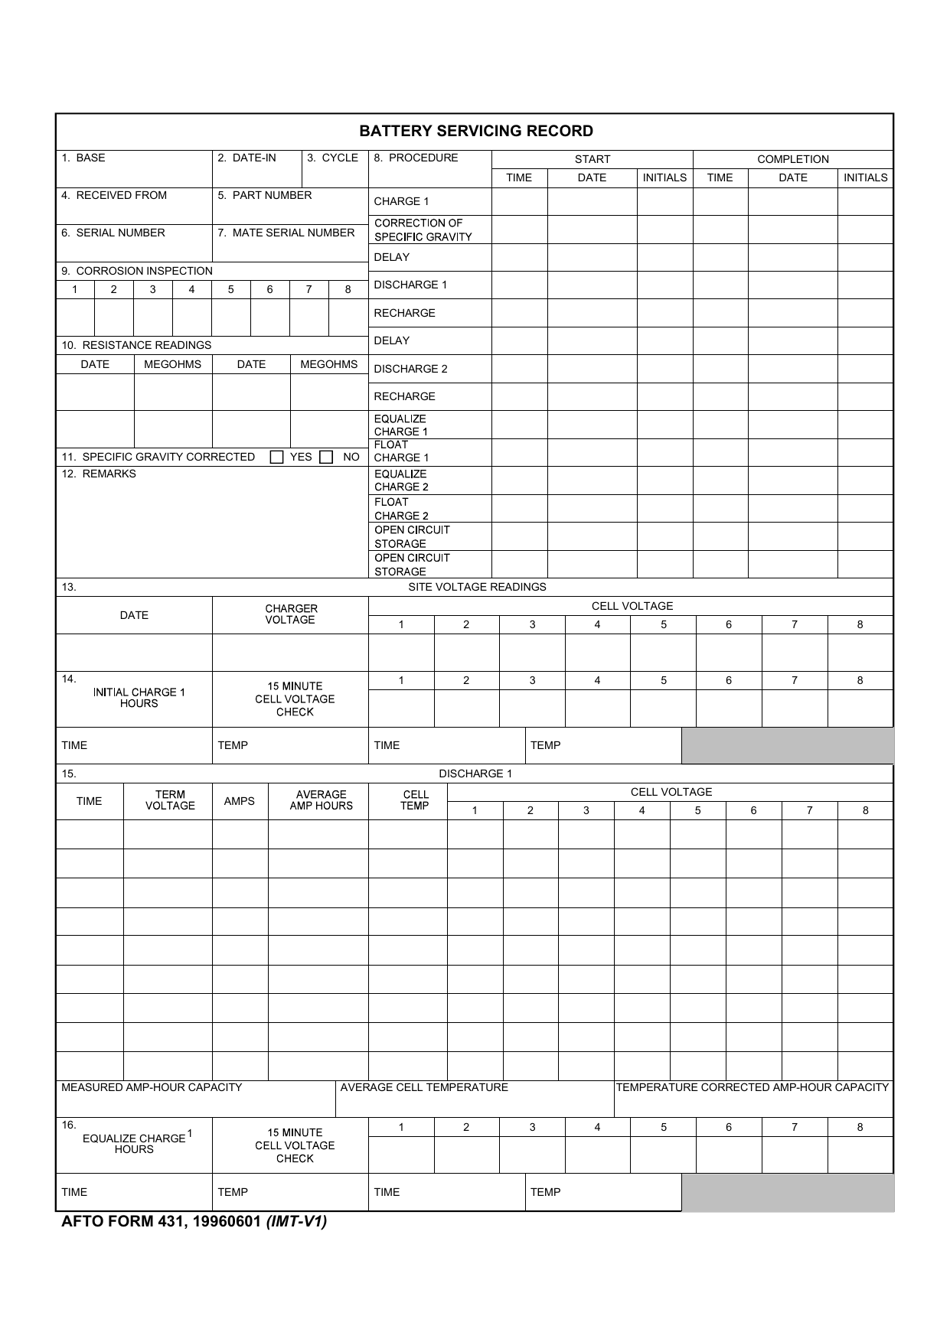 AFTO Form 431 Battery Servicing Record, Page 1